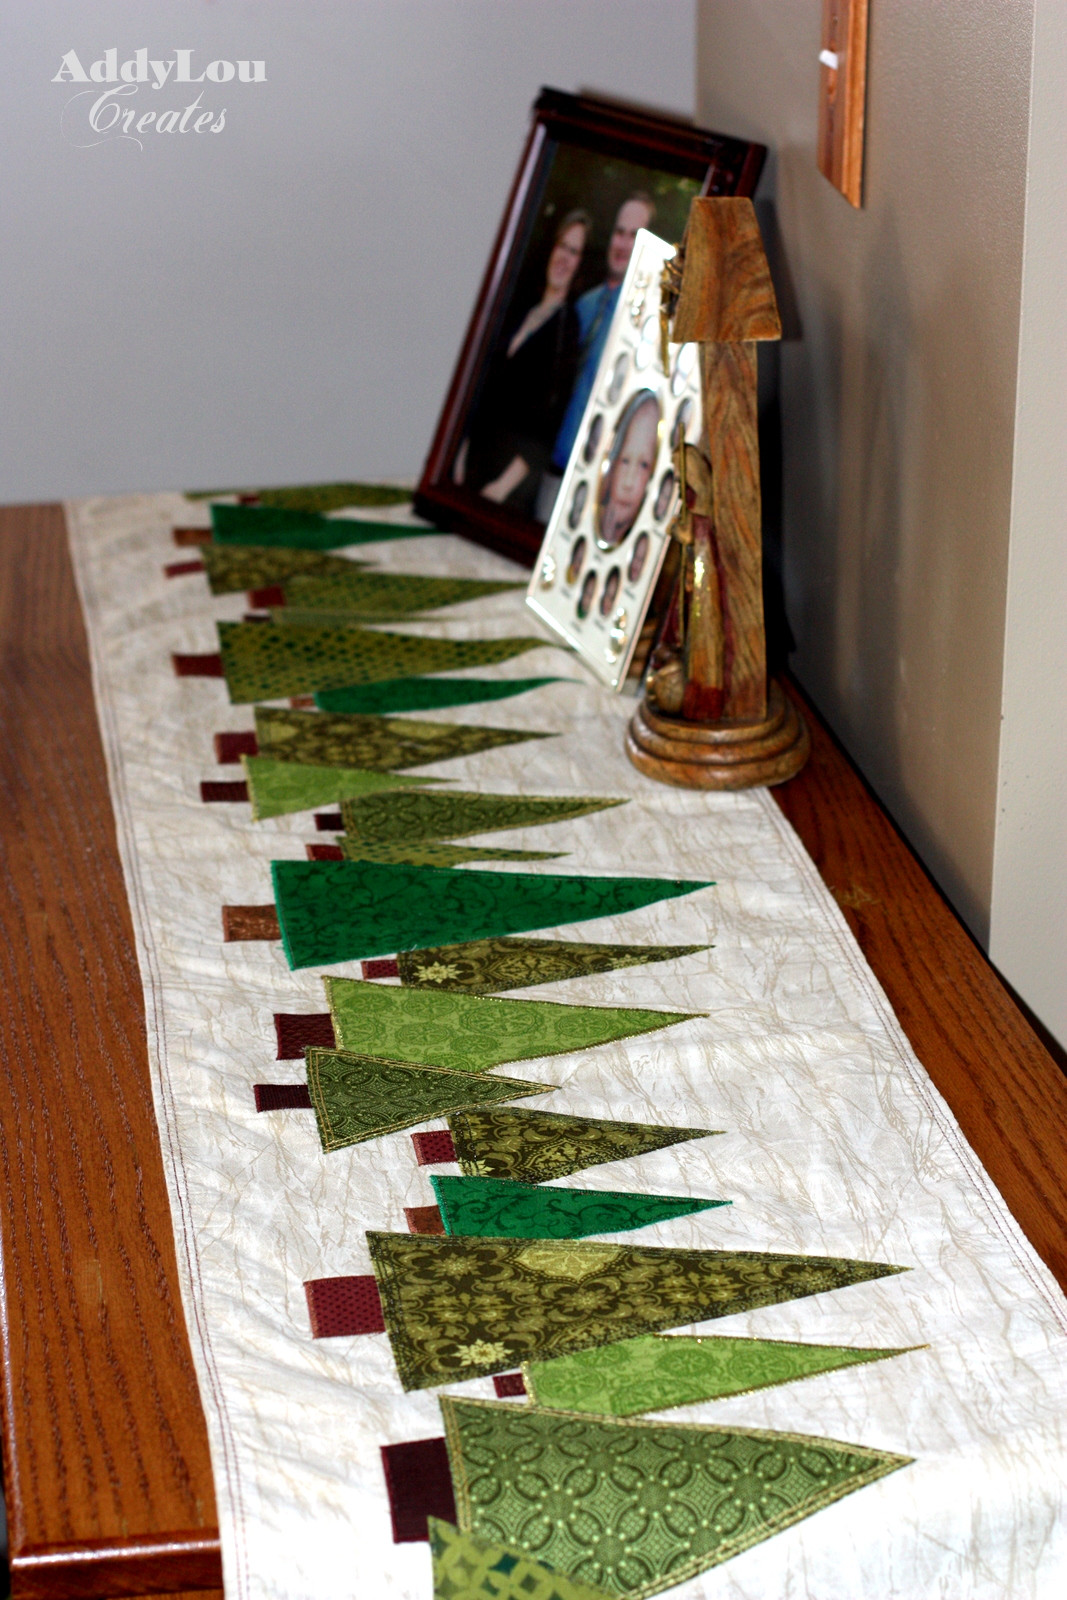 Free Christmas Table Runner Patterns
 Quilt Inspiration Free pattern day Christmas Table Runners